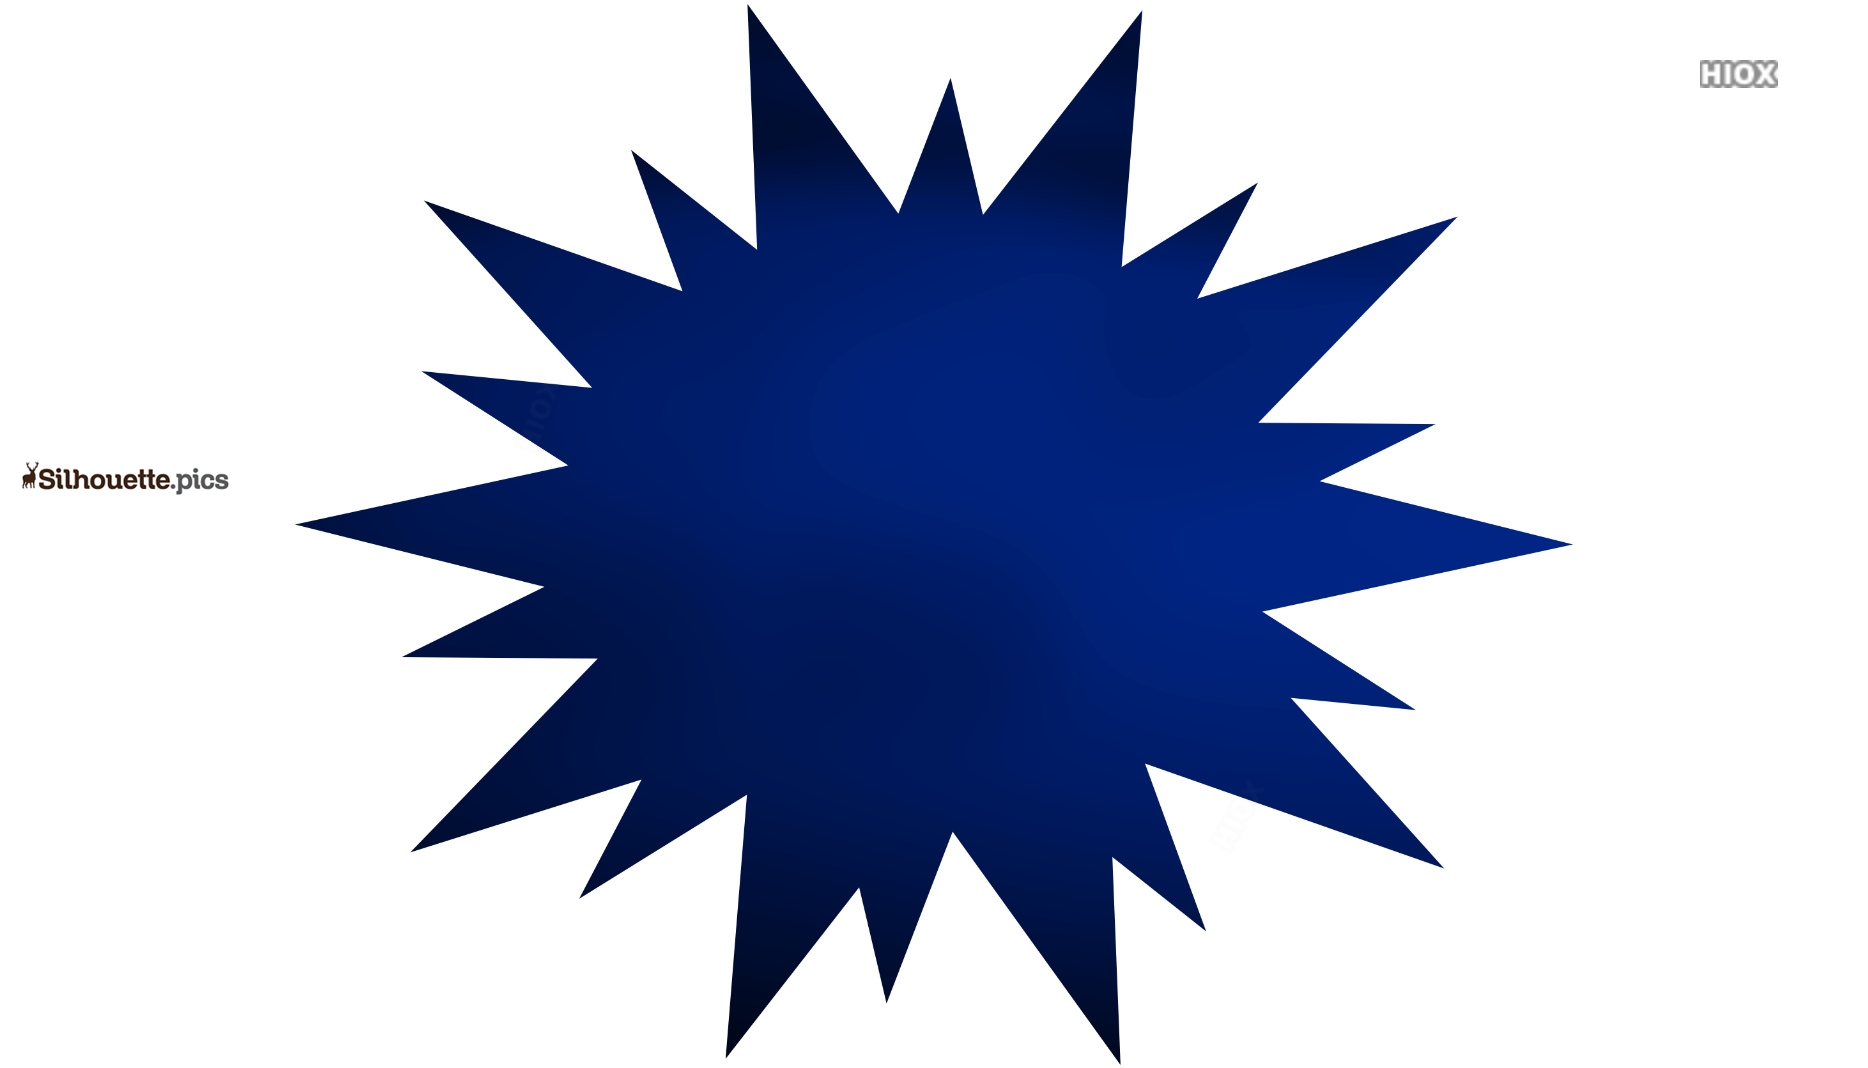 Solid black star burst shape. clipart #166218 at Graphics Factory ...